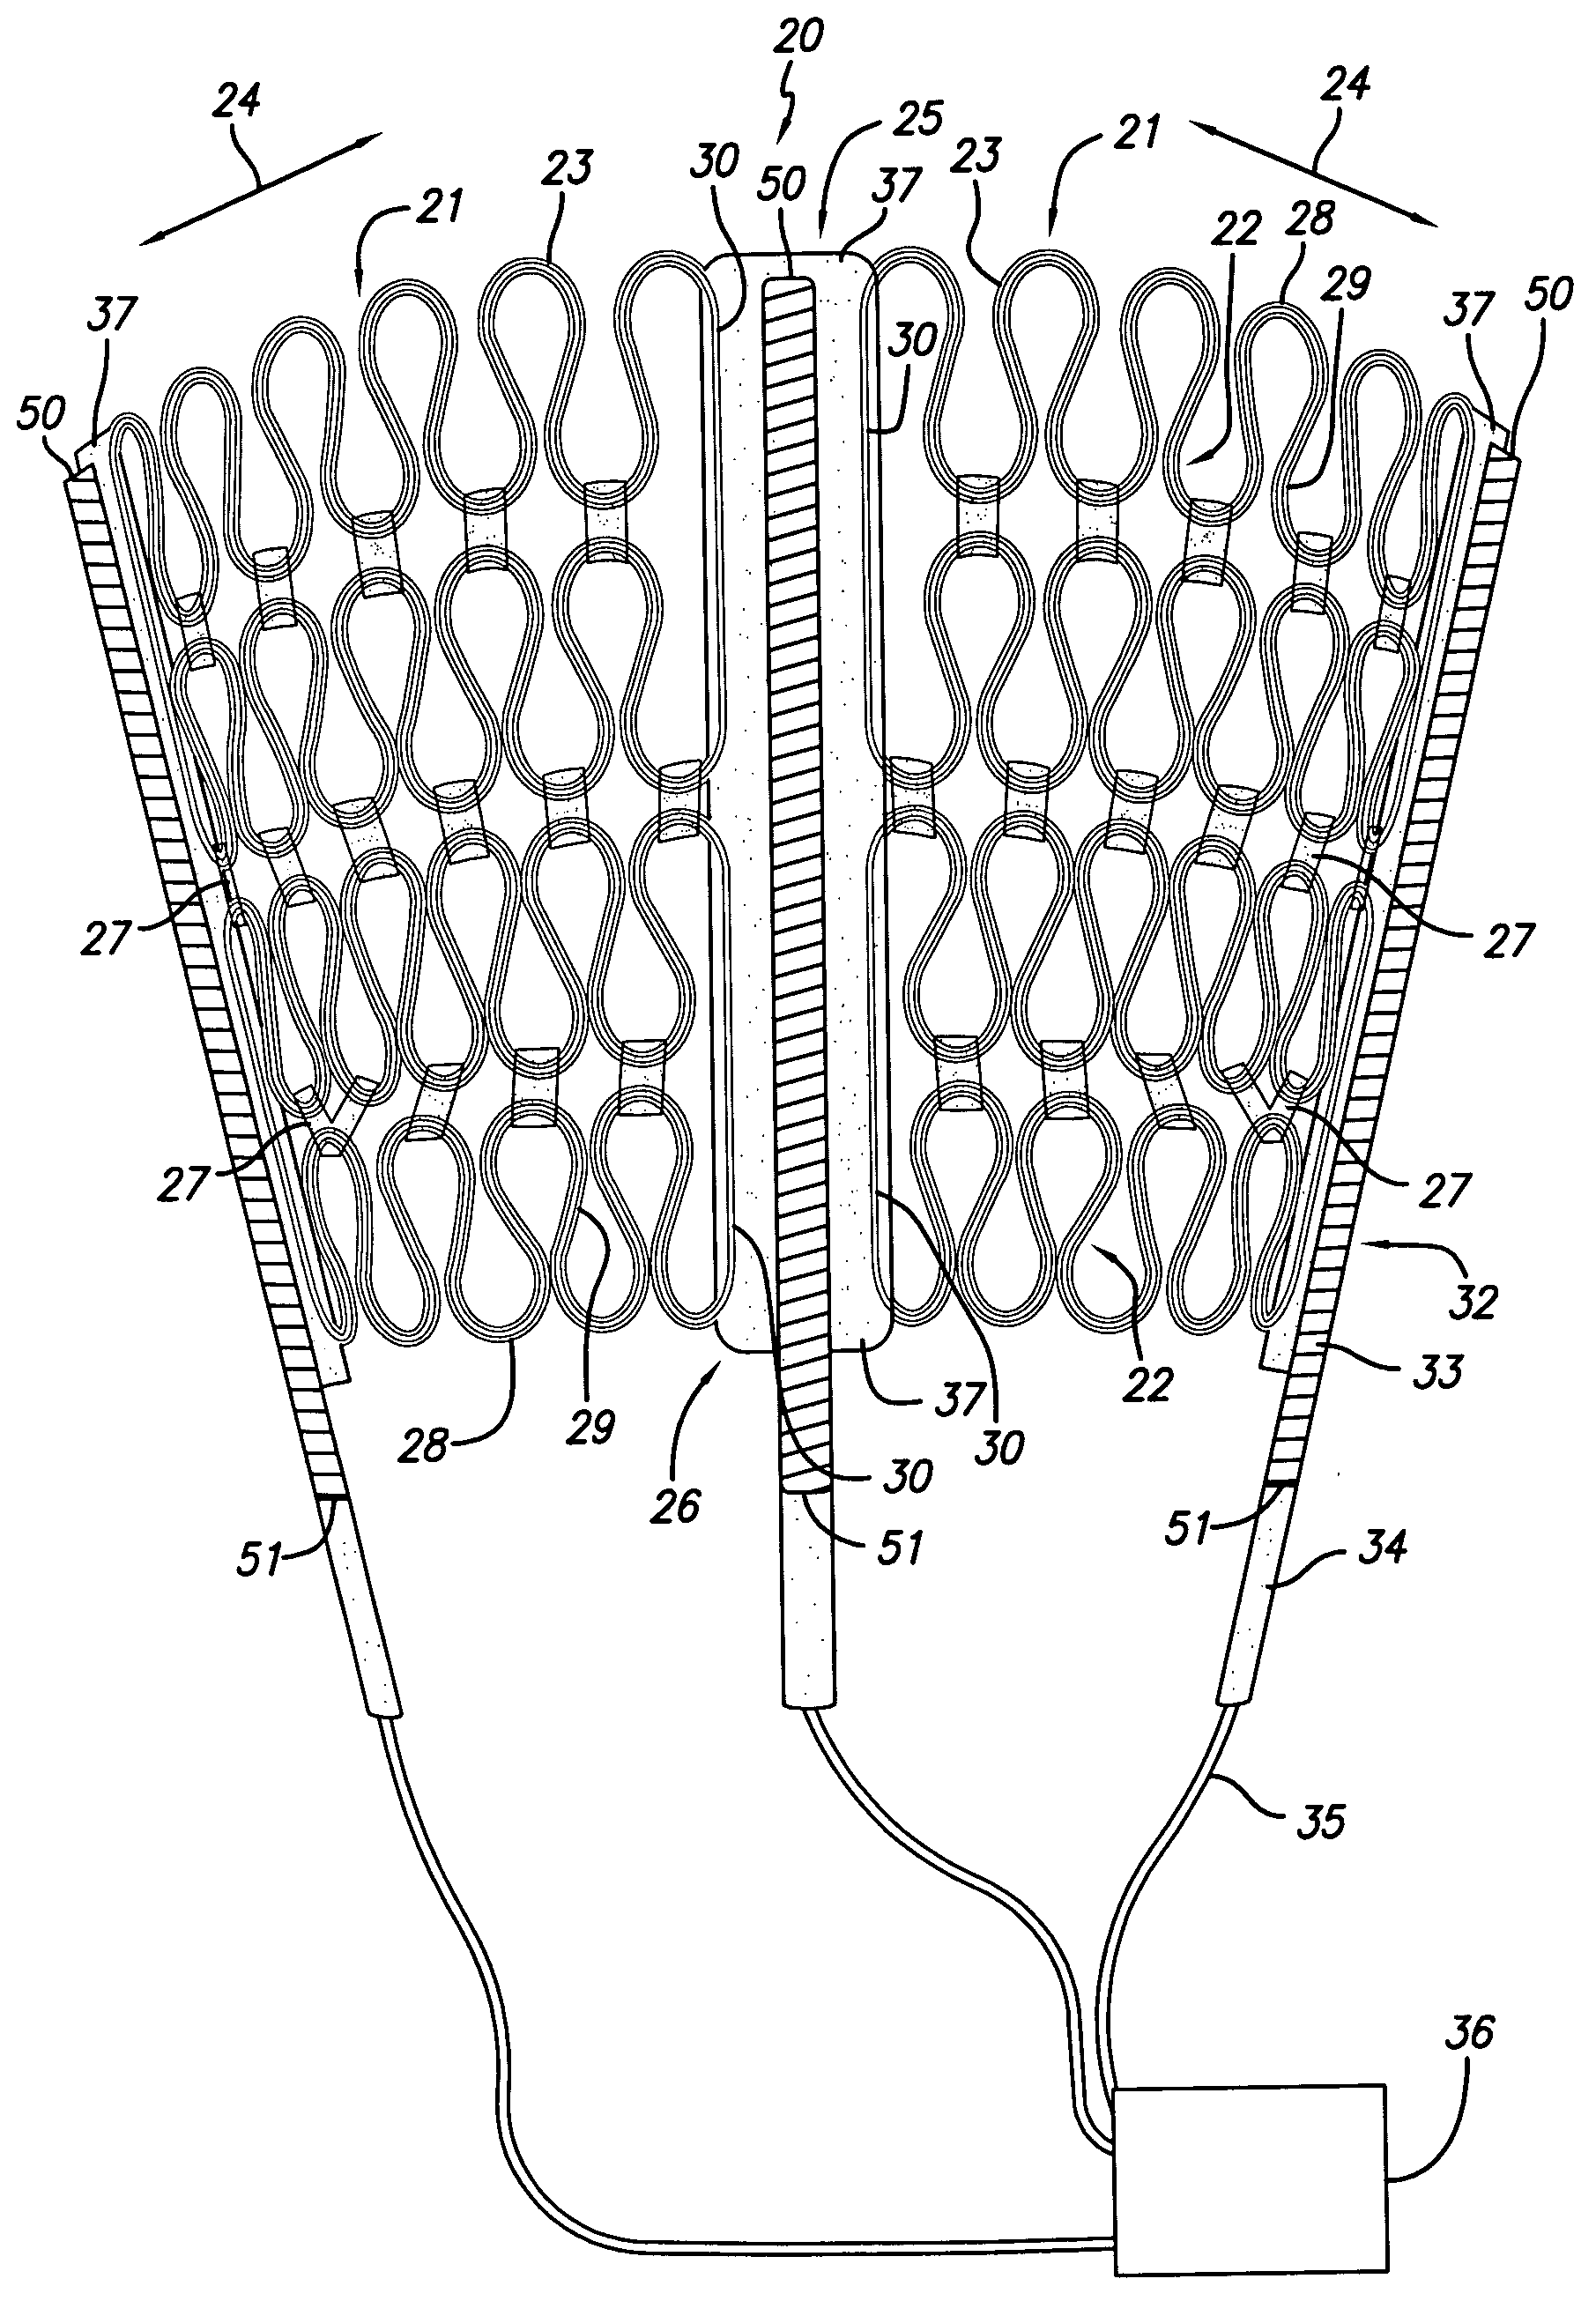 Cardiac harness for treating congestive heart failure and for defibrillating and/or pacing/sensing